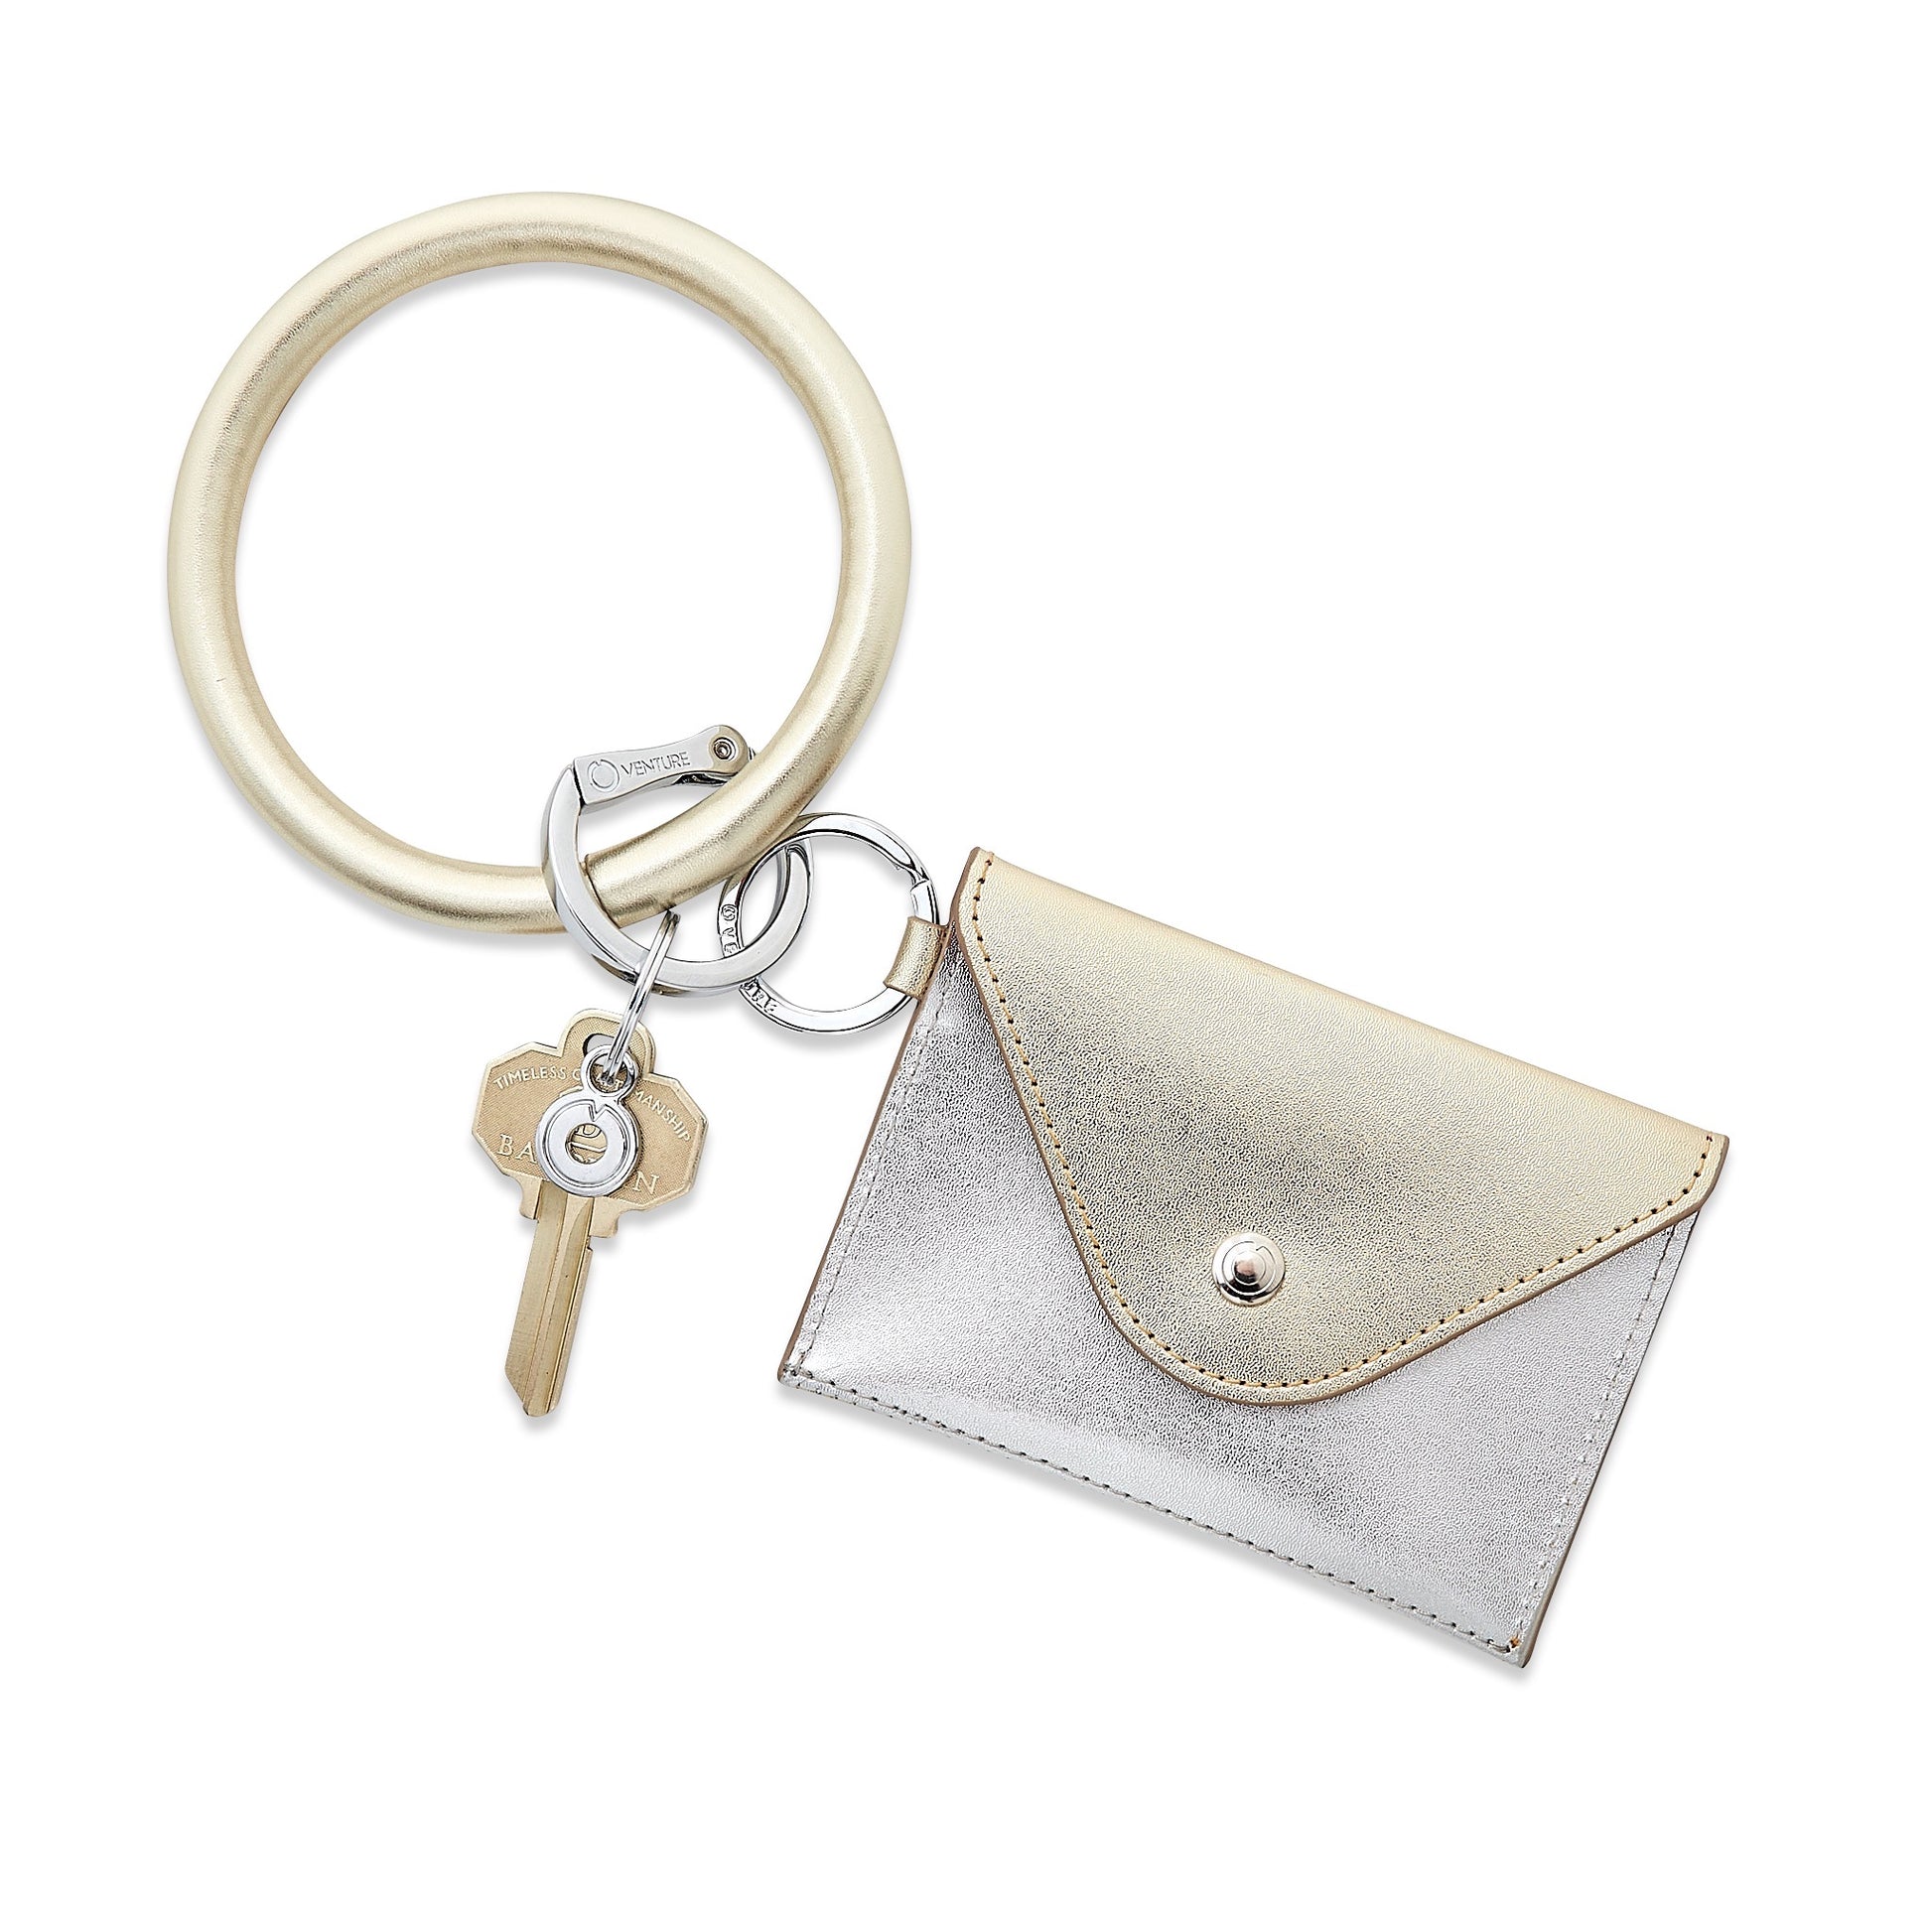 Stylish leather keychain wallet in mini envelope design shown with O Venture keychain.